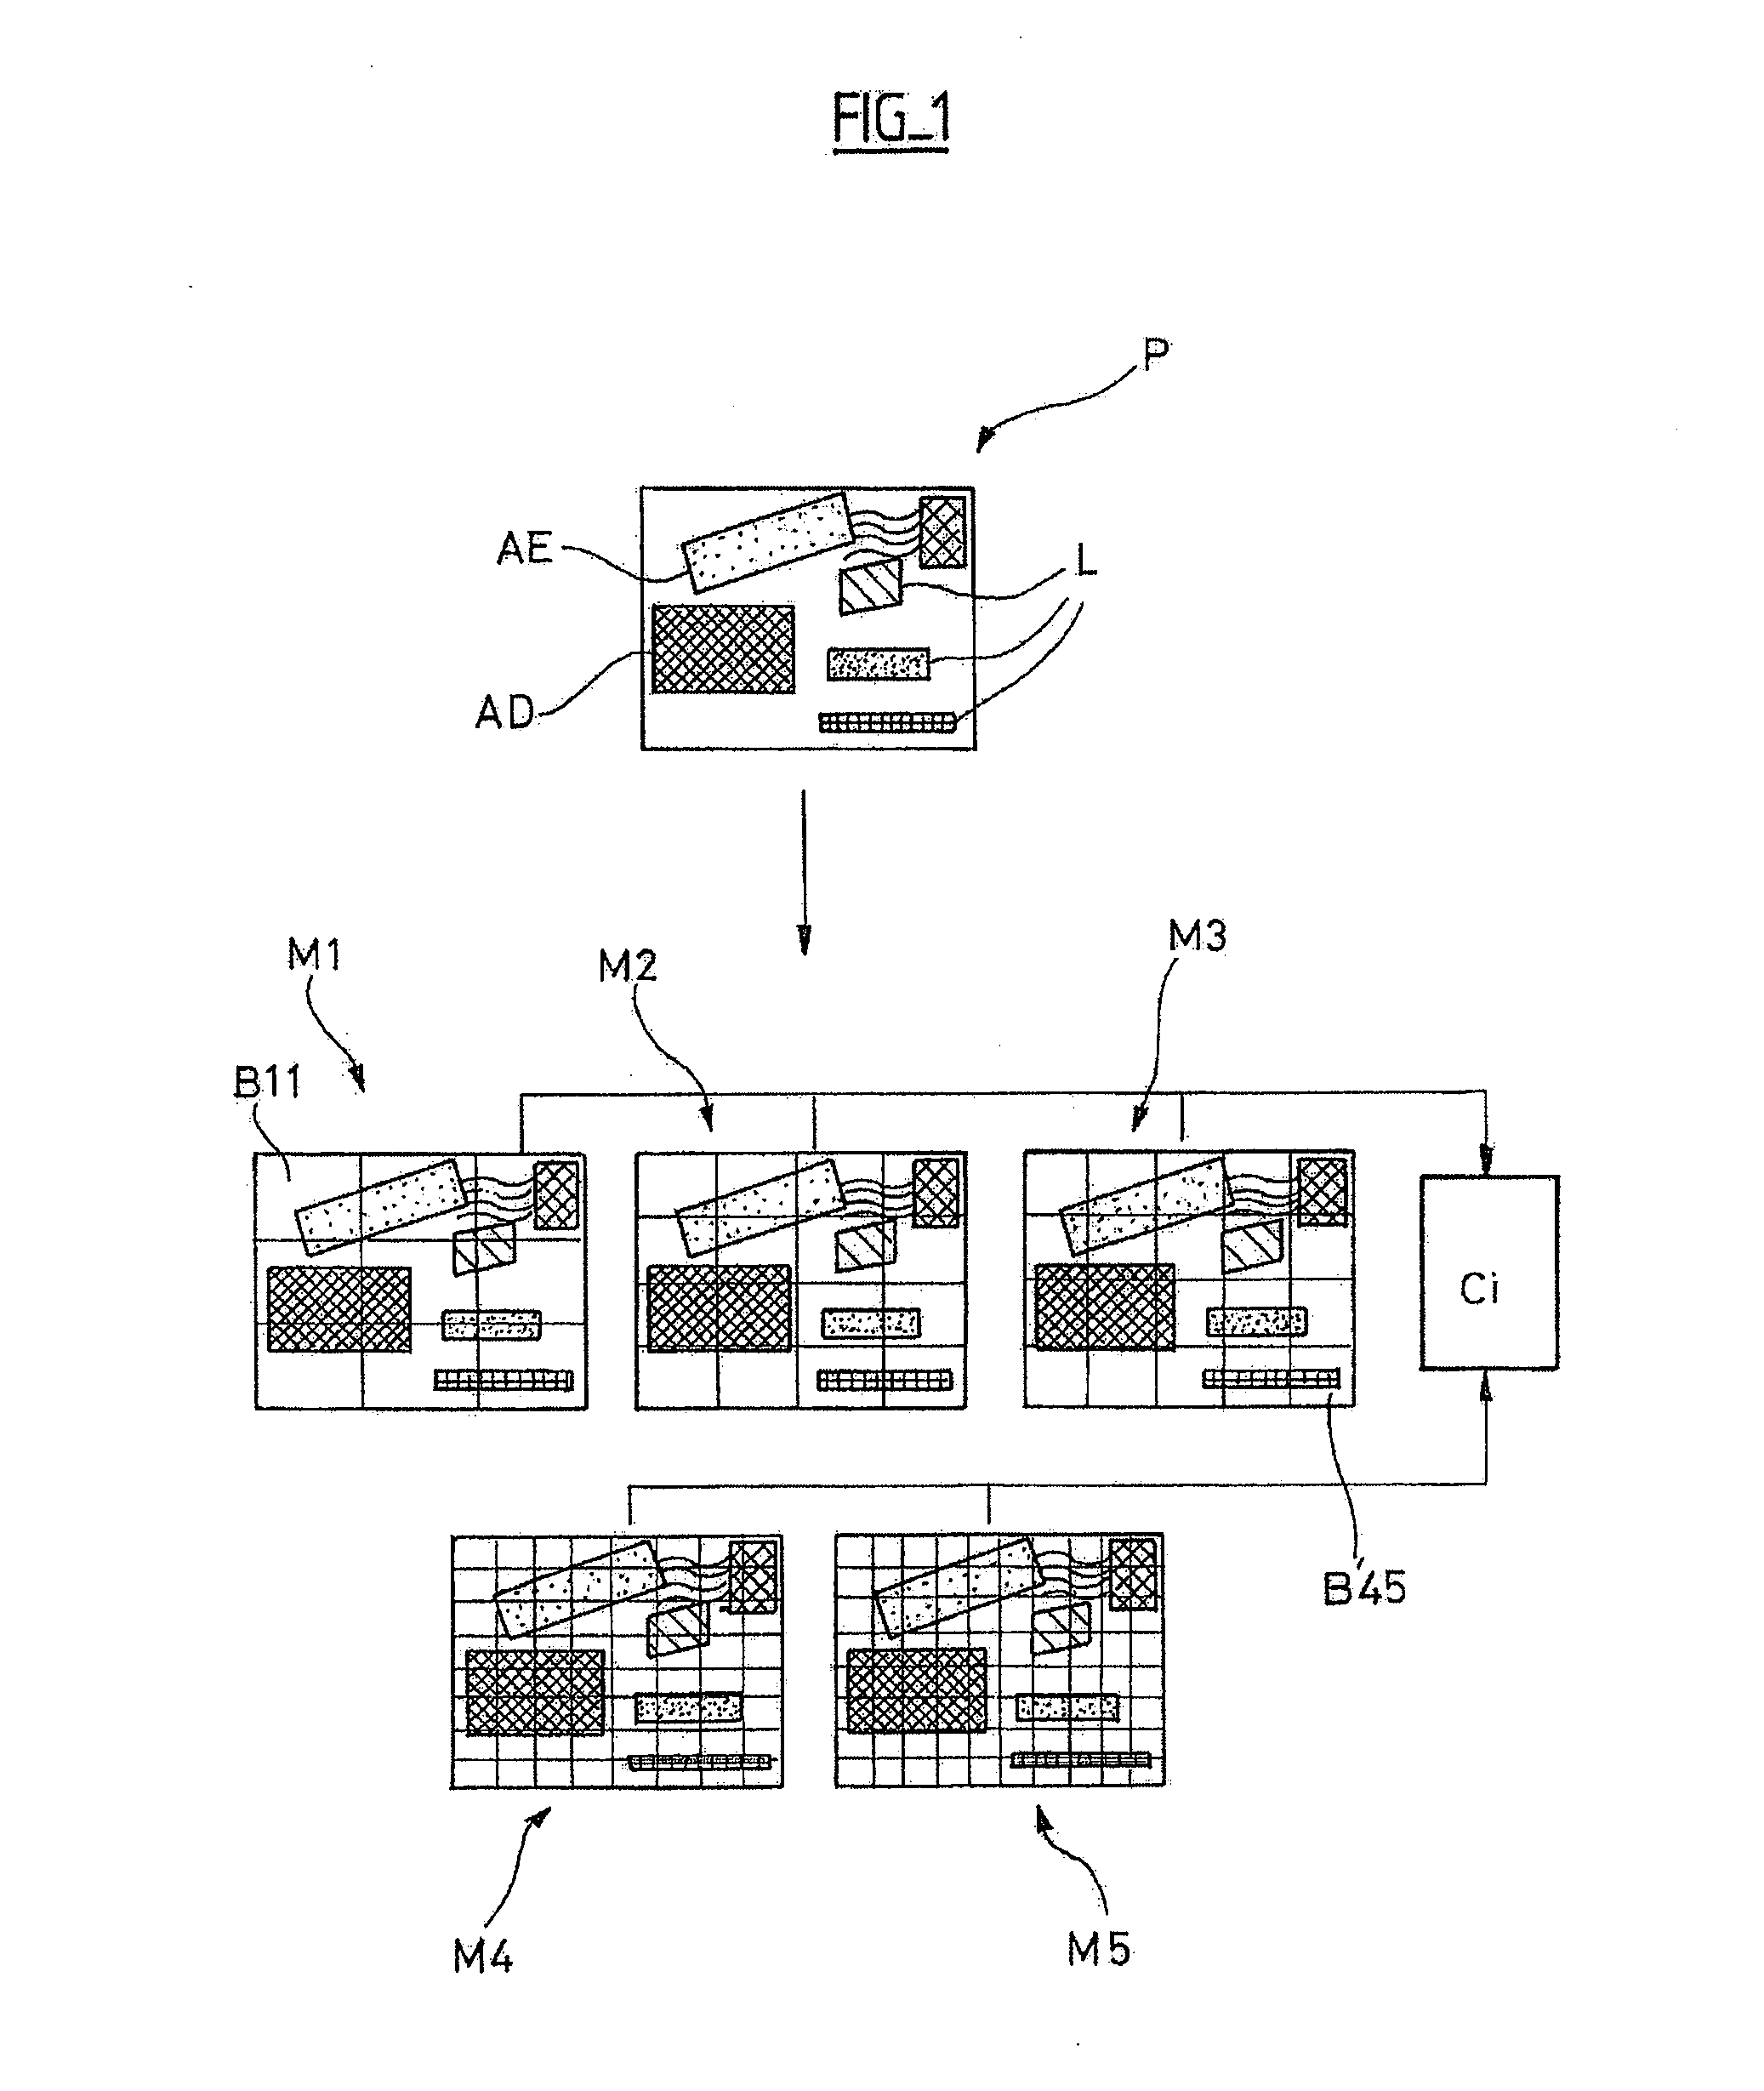 Method of Processing Mailpieces Using Customer Codes Associated With Digital Fingerprints